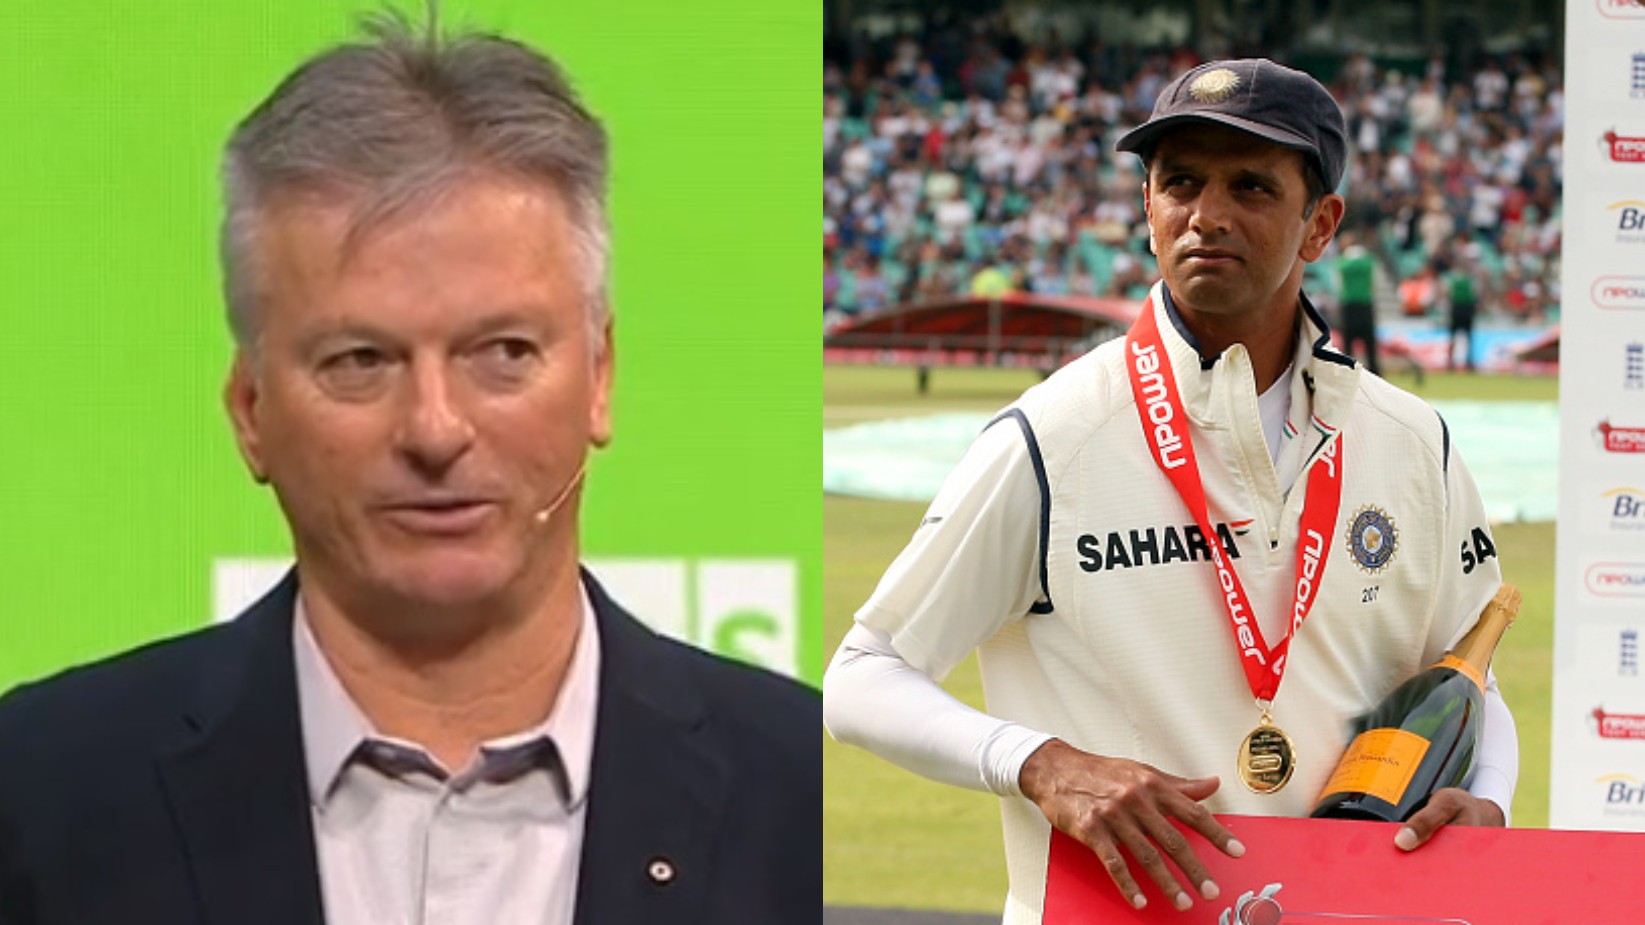 Steve Waugh praises Rahul Dravid, says “he was as important as Sachin to India”